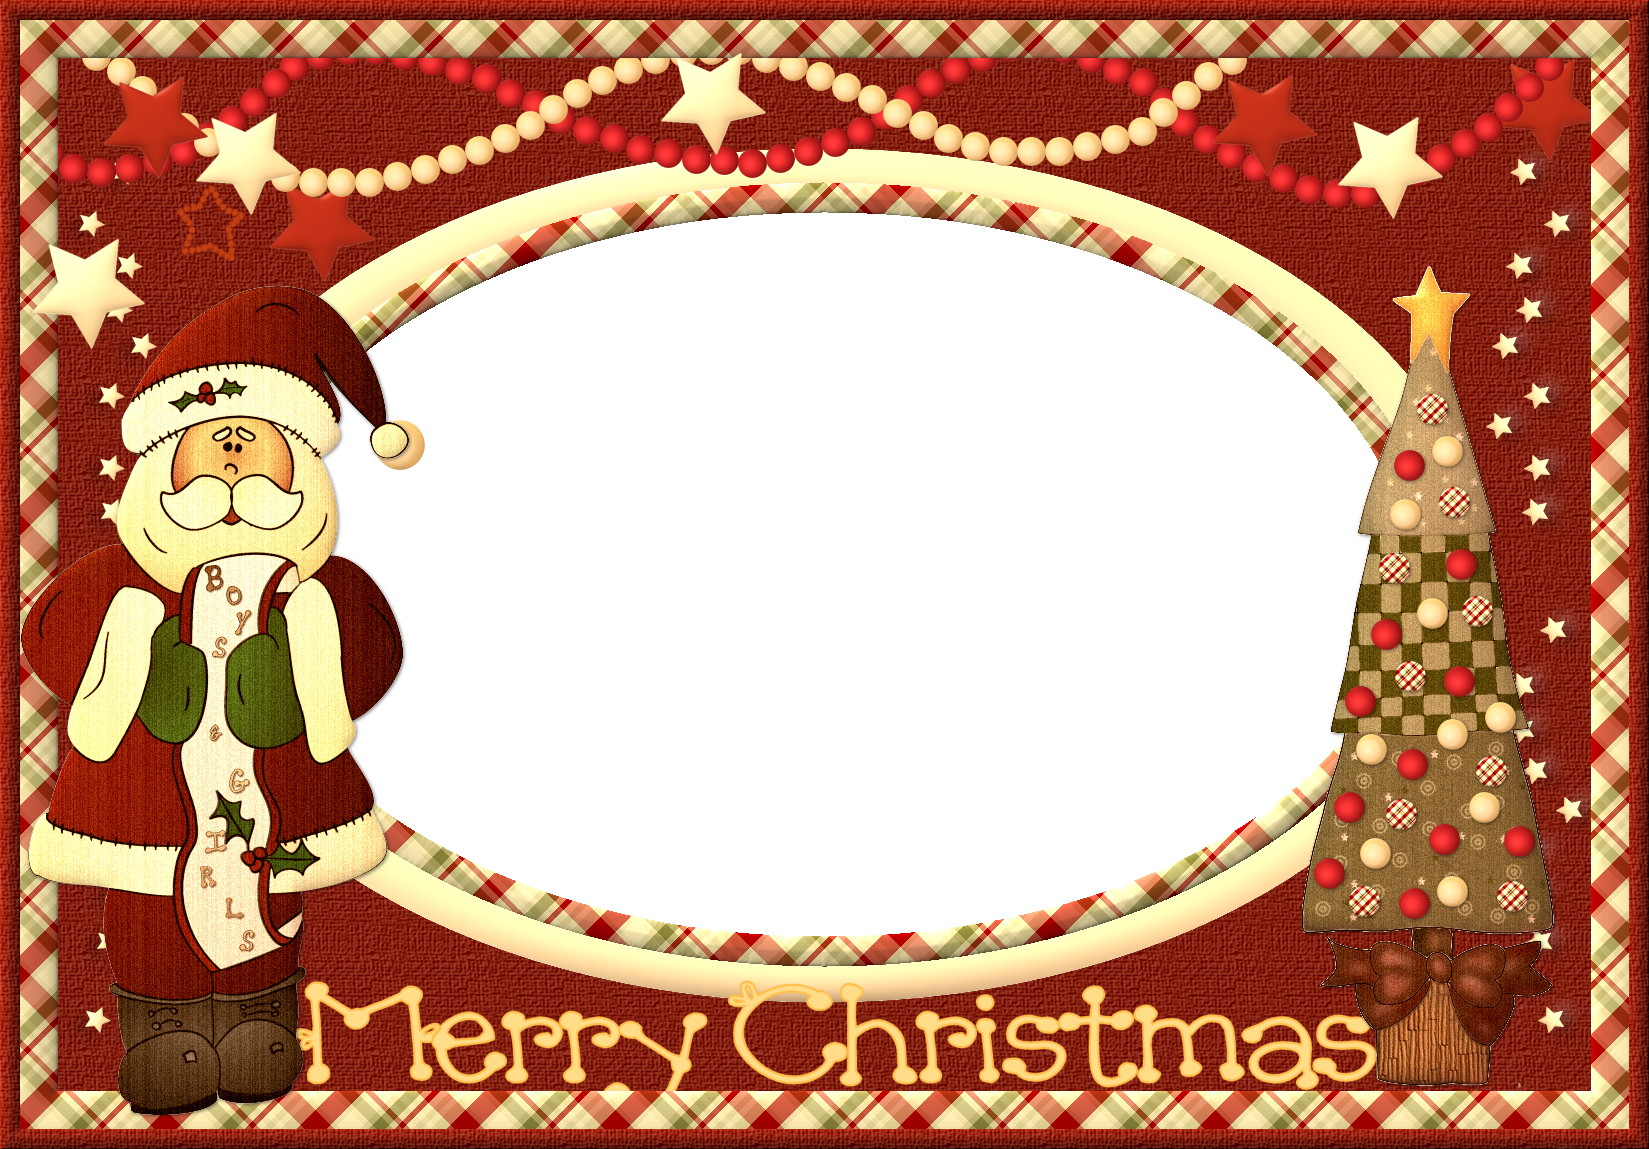 Merry christmas frame png, Merry christmas frame png Transparent FREE for download on WebStockReview 2020